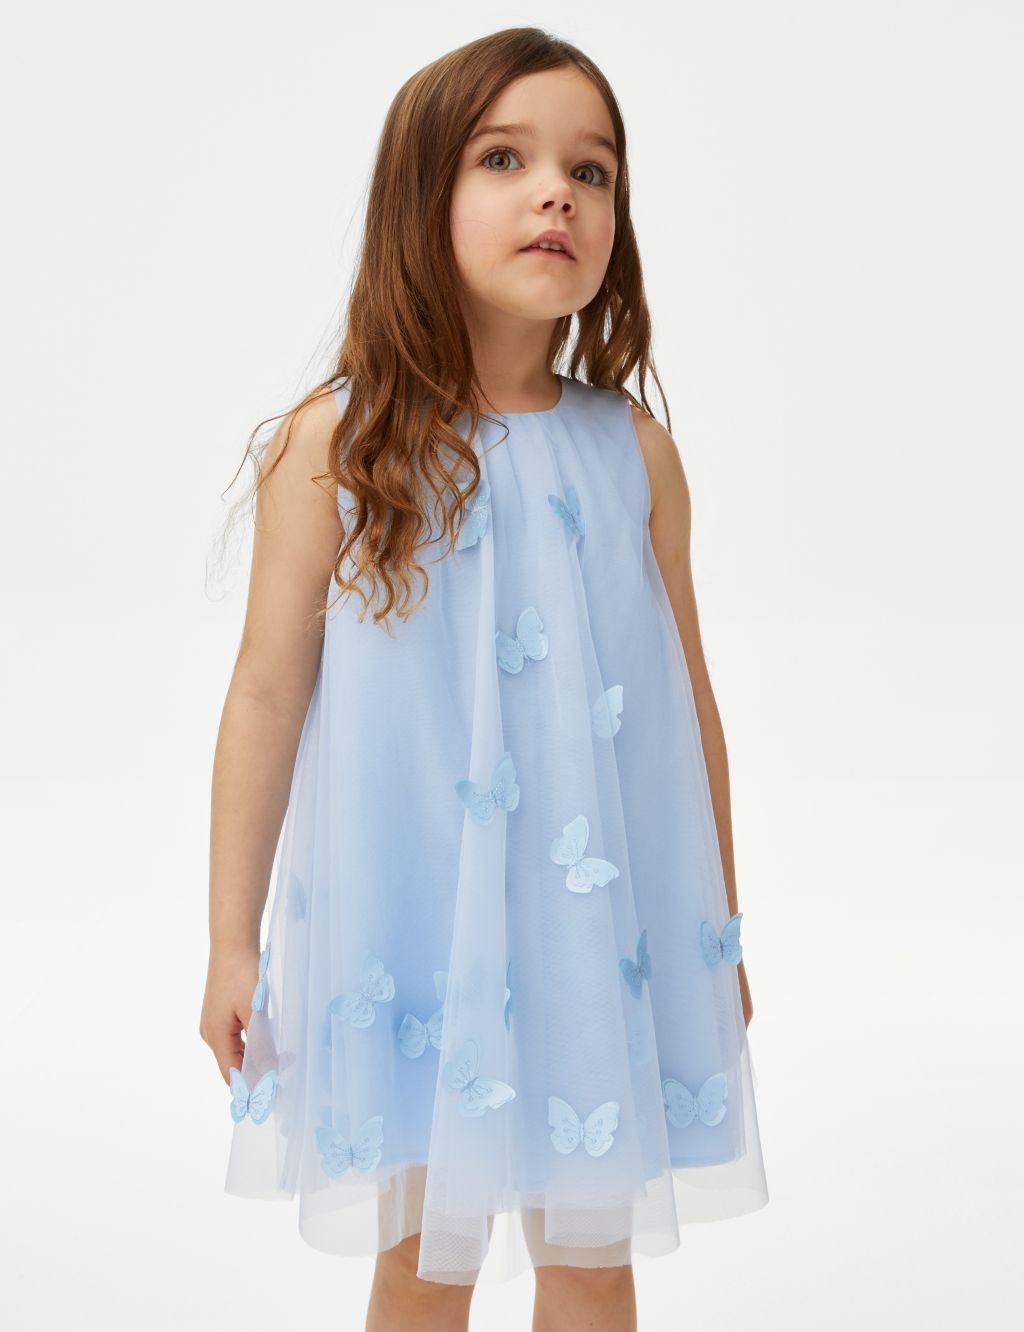 Butterfly Applique Dress (2-7 Years) image 1